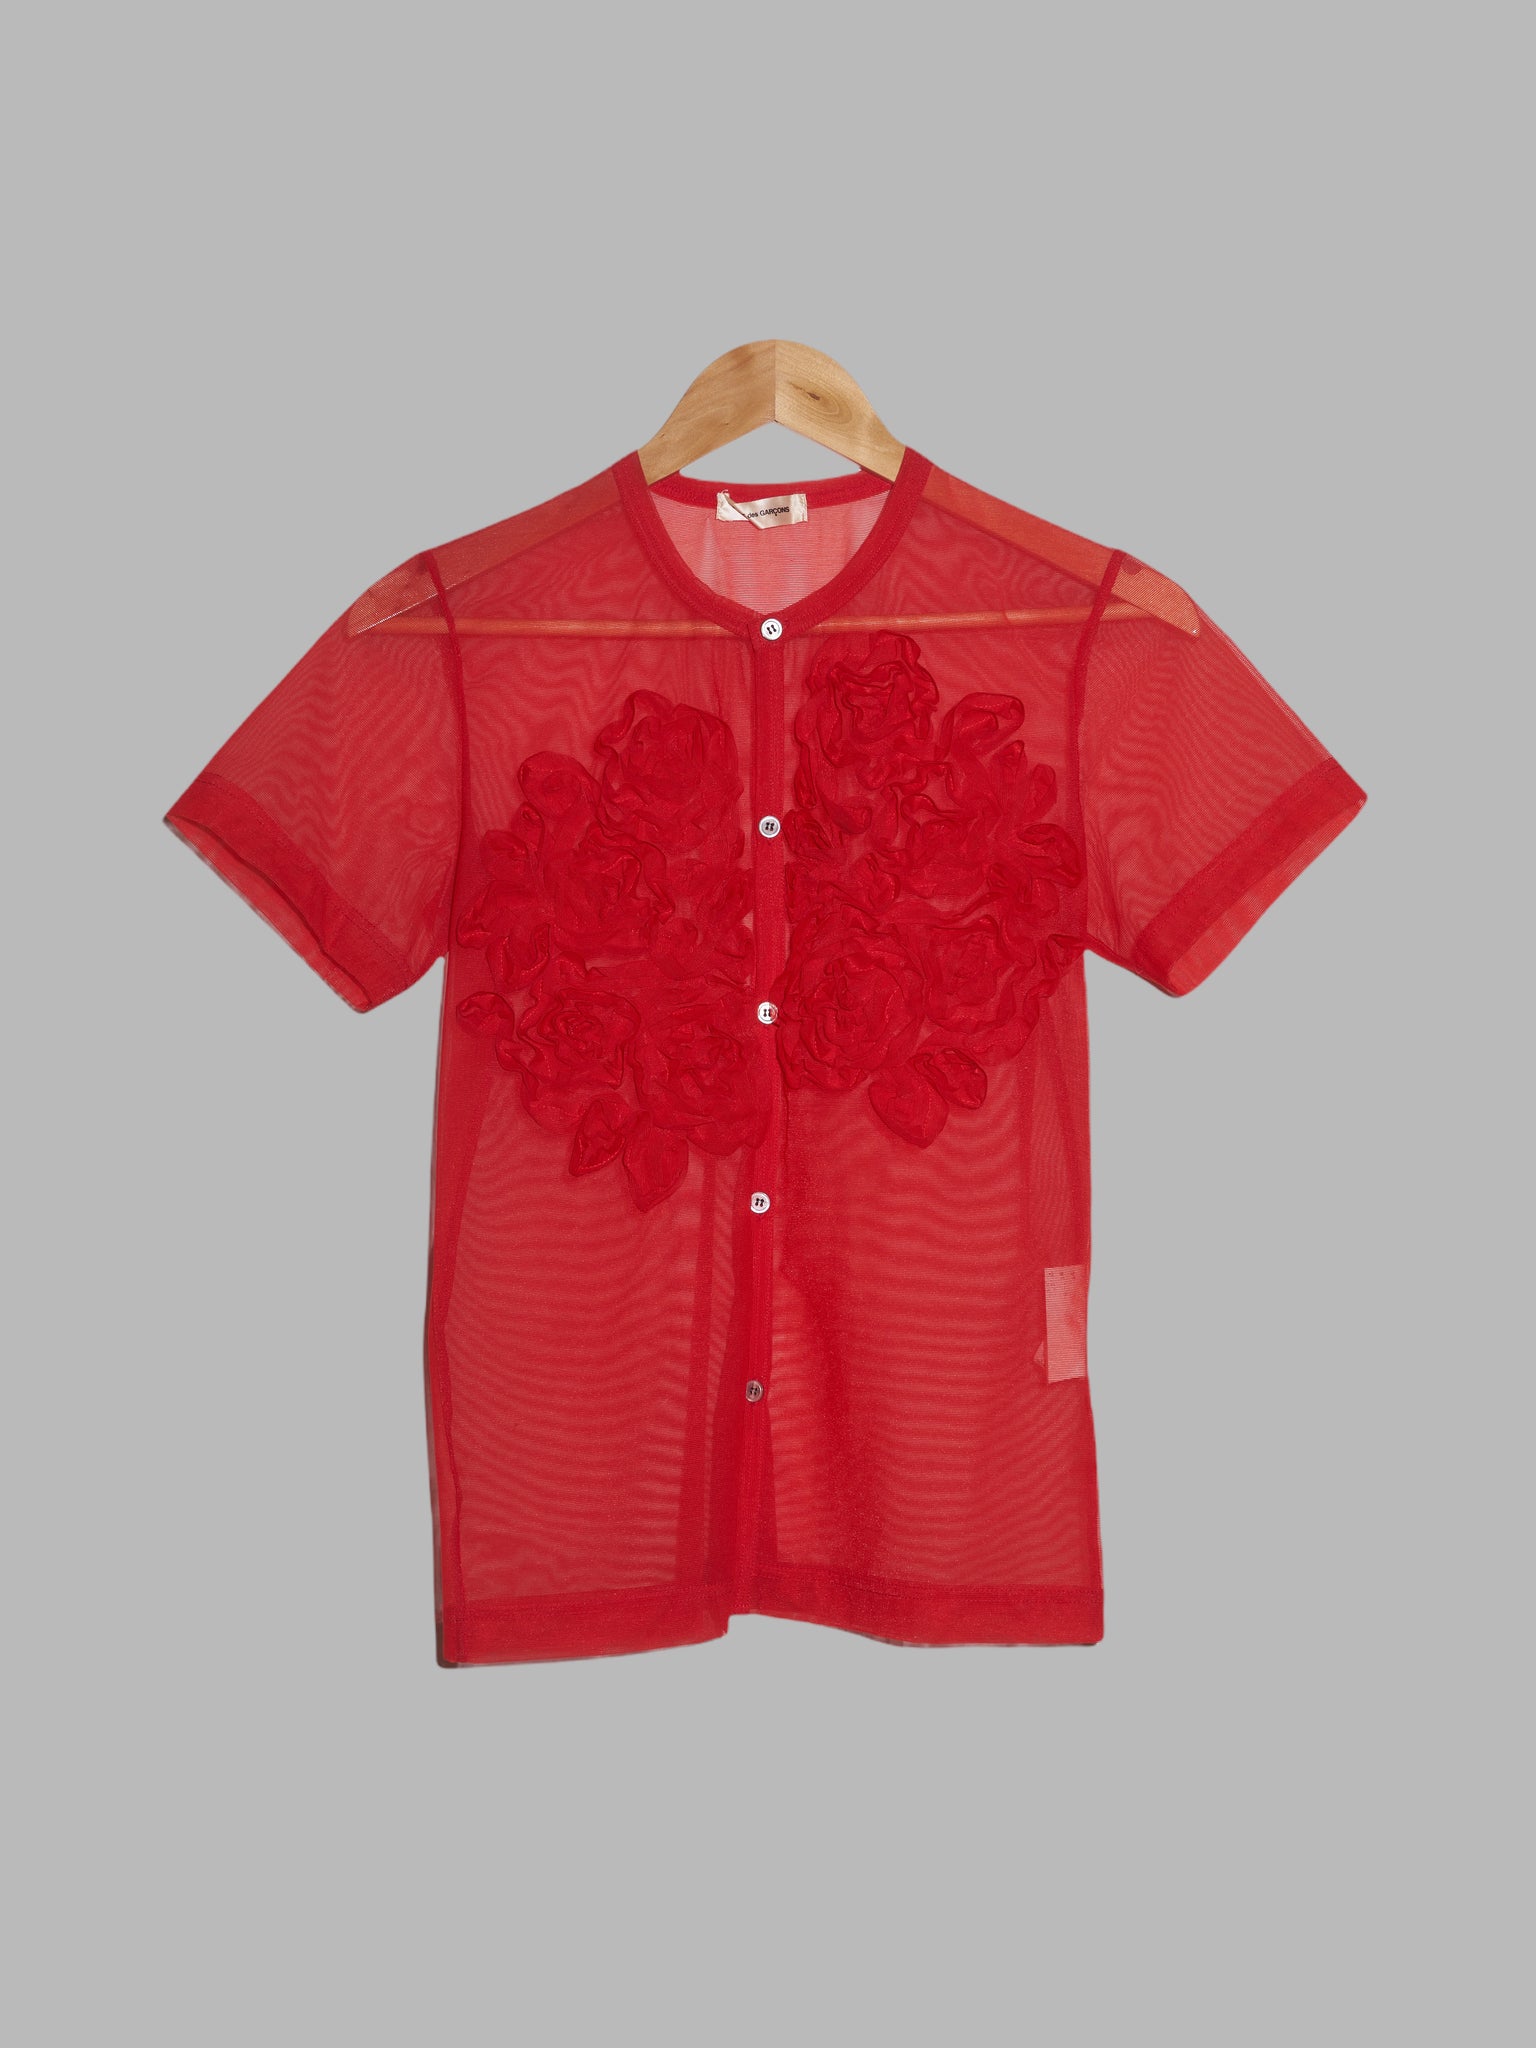 Comme des Garcons SS1998 sheer red floral ruffle short sleeve top or cardigan